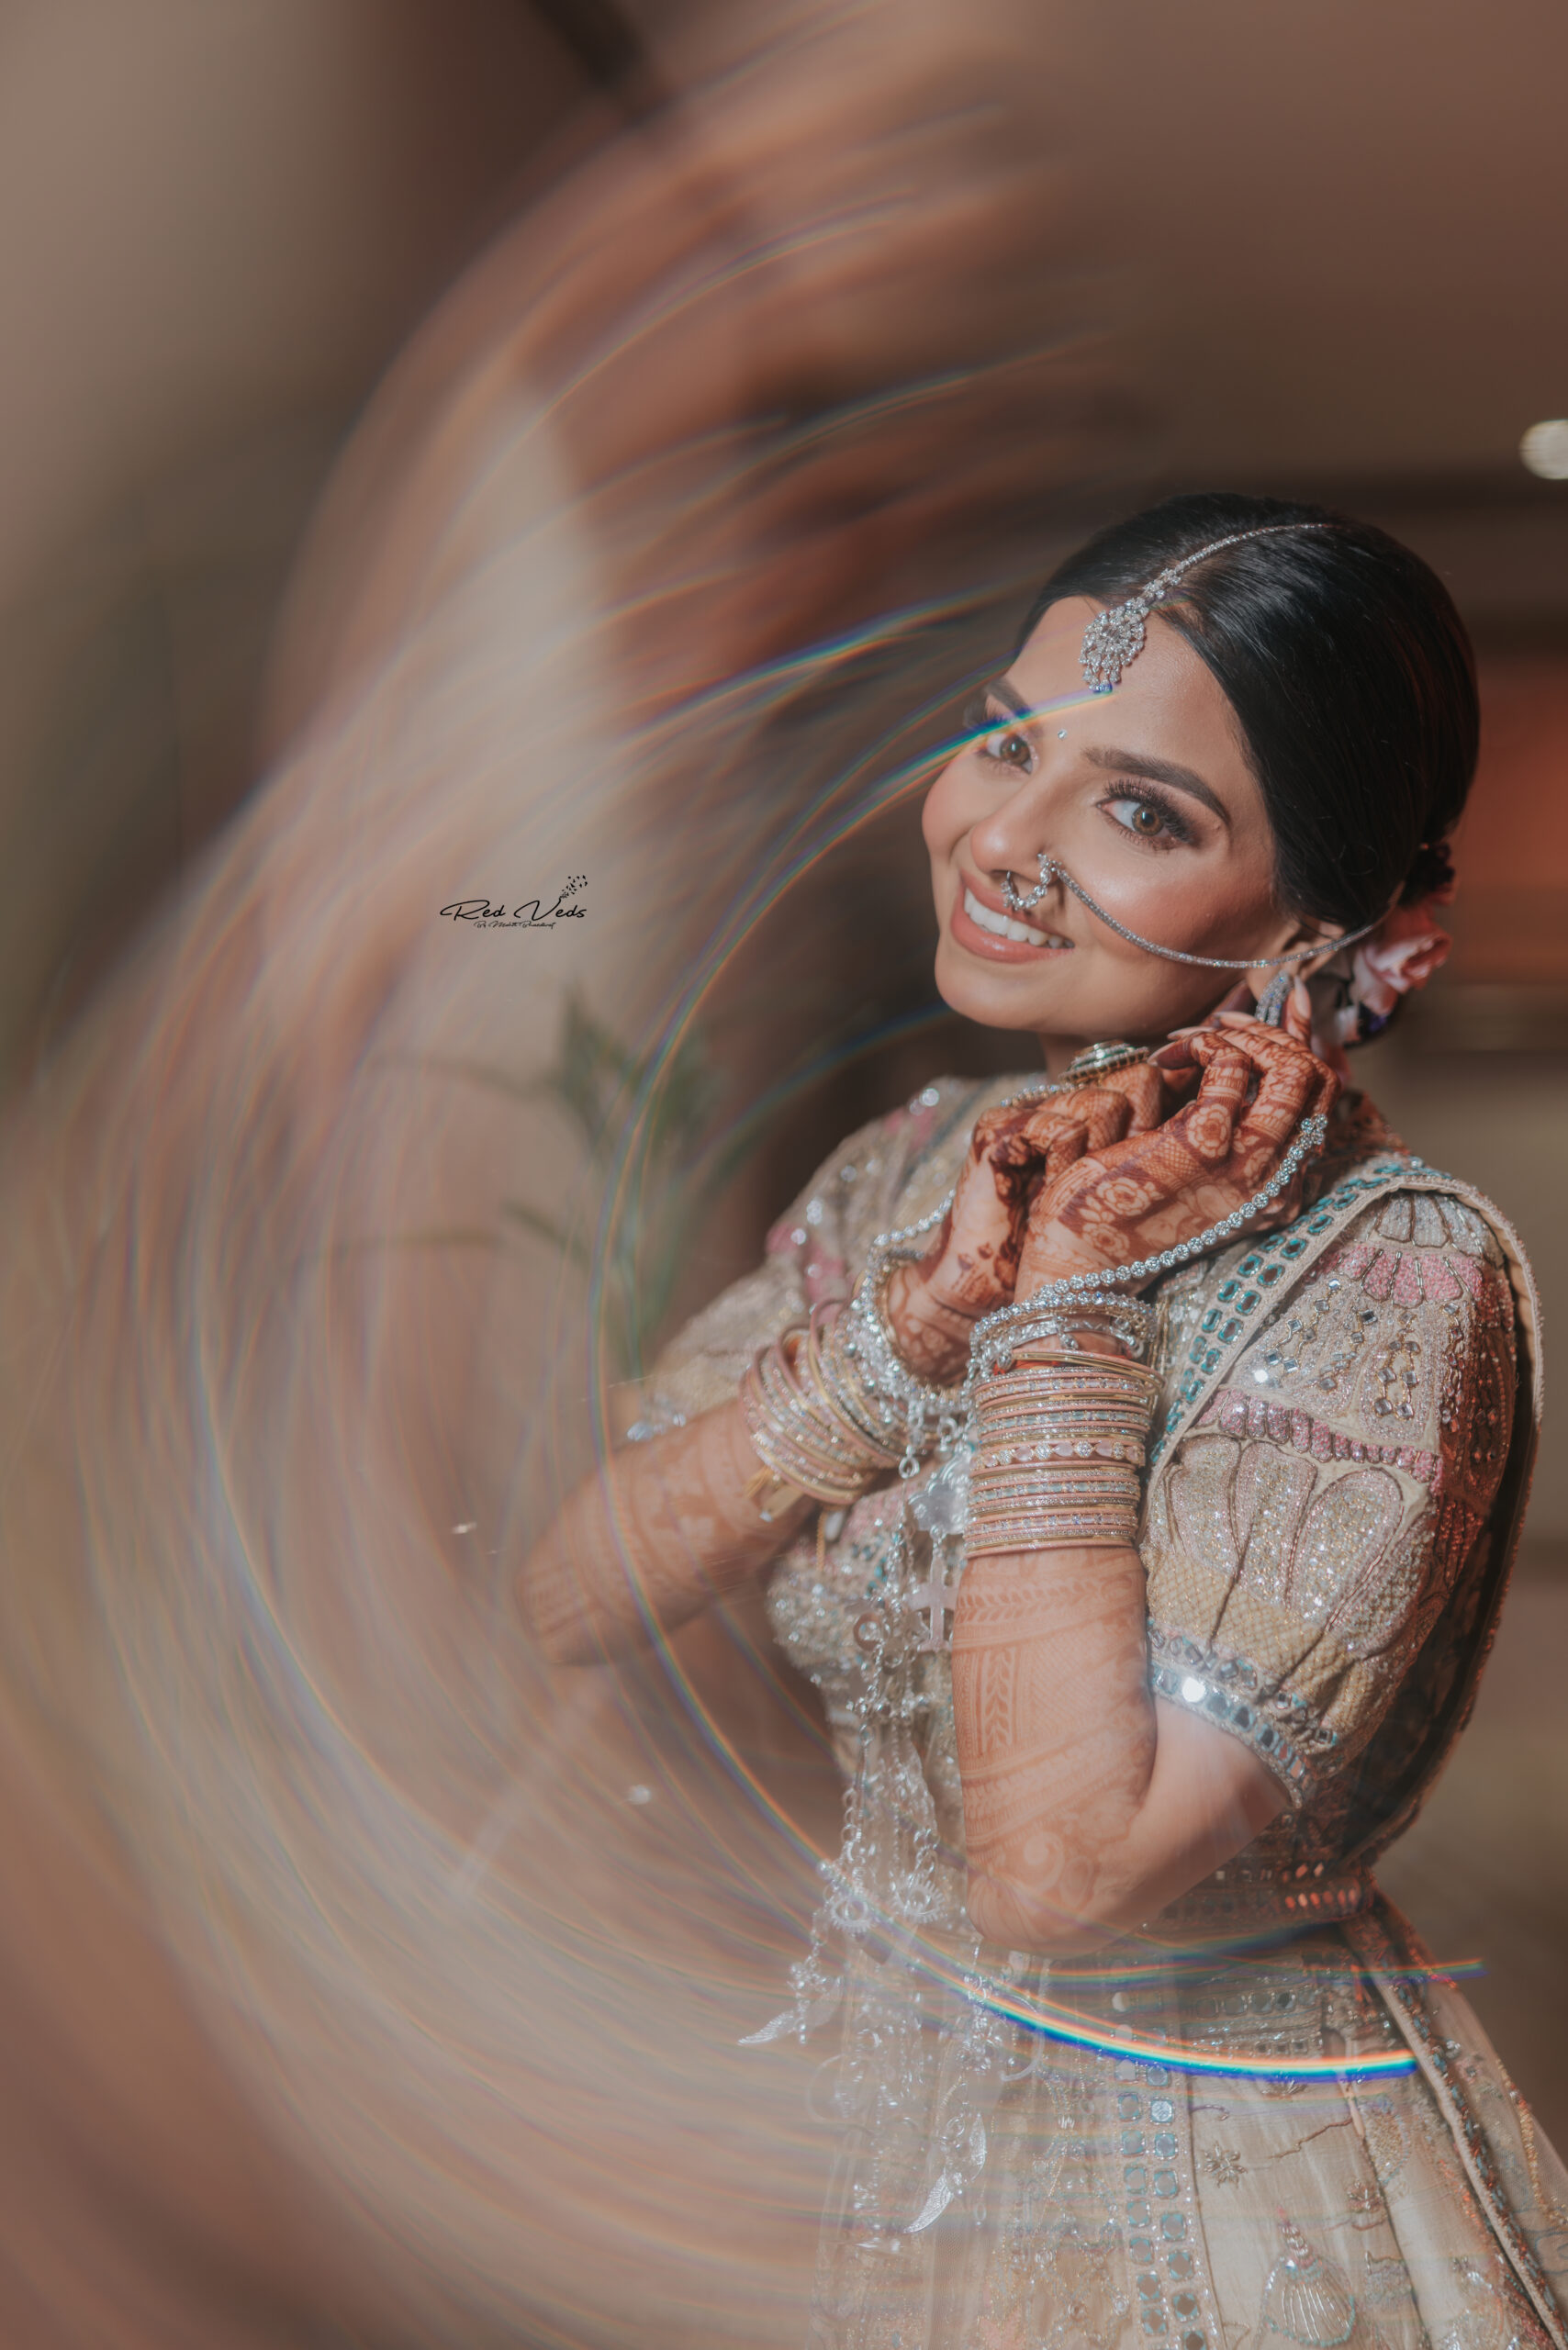 Snohomish Fusion Indian Wedding With Megan and Mo – Husband and Wife  Snohomish & Seattle Wedding & Portrait Photographers 10+ years